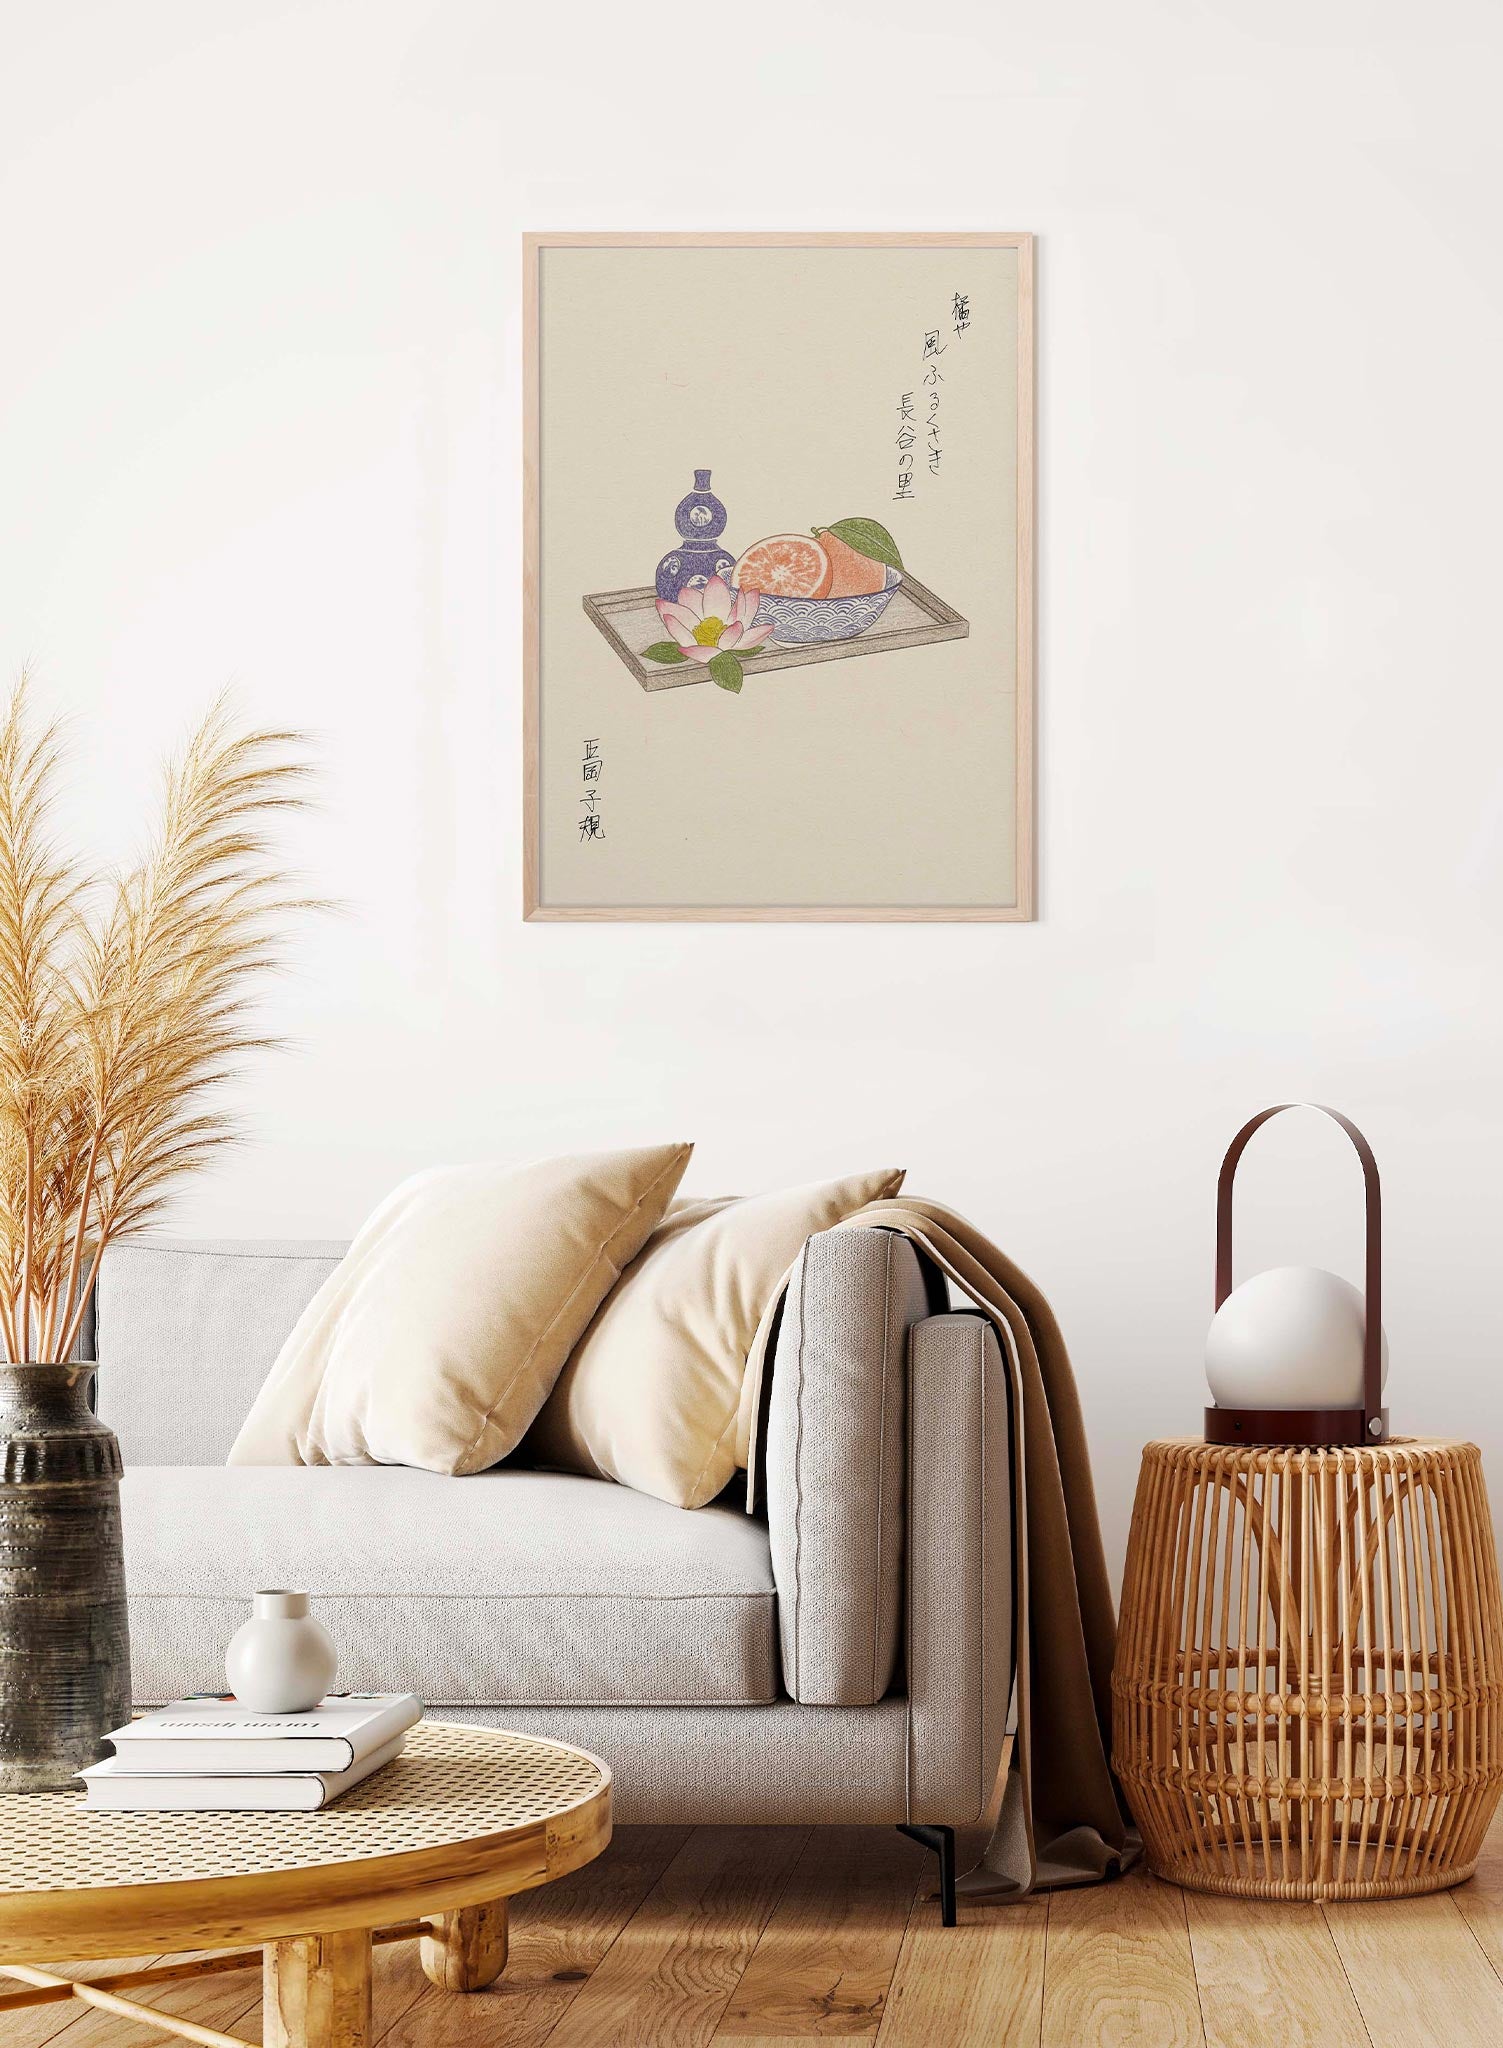 Tachibana is a minimalist illustration by Opposite Wall of a tray with a grapefruit in a bowl, a bottle and a lotus flower.